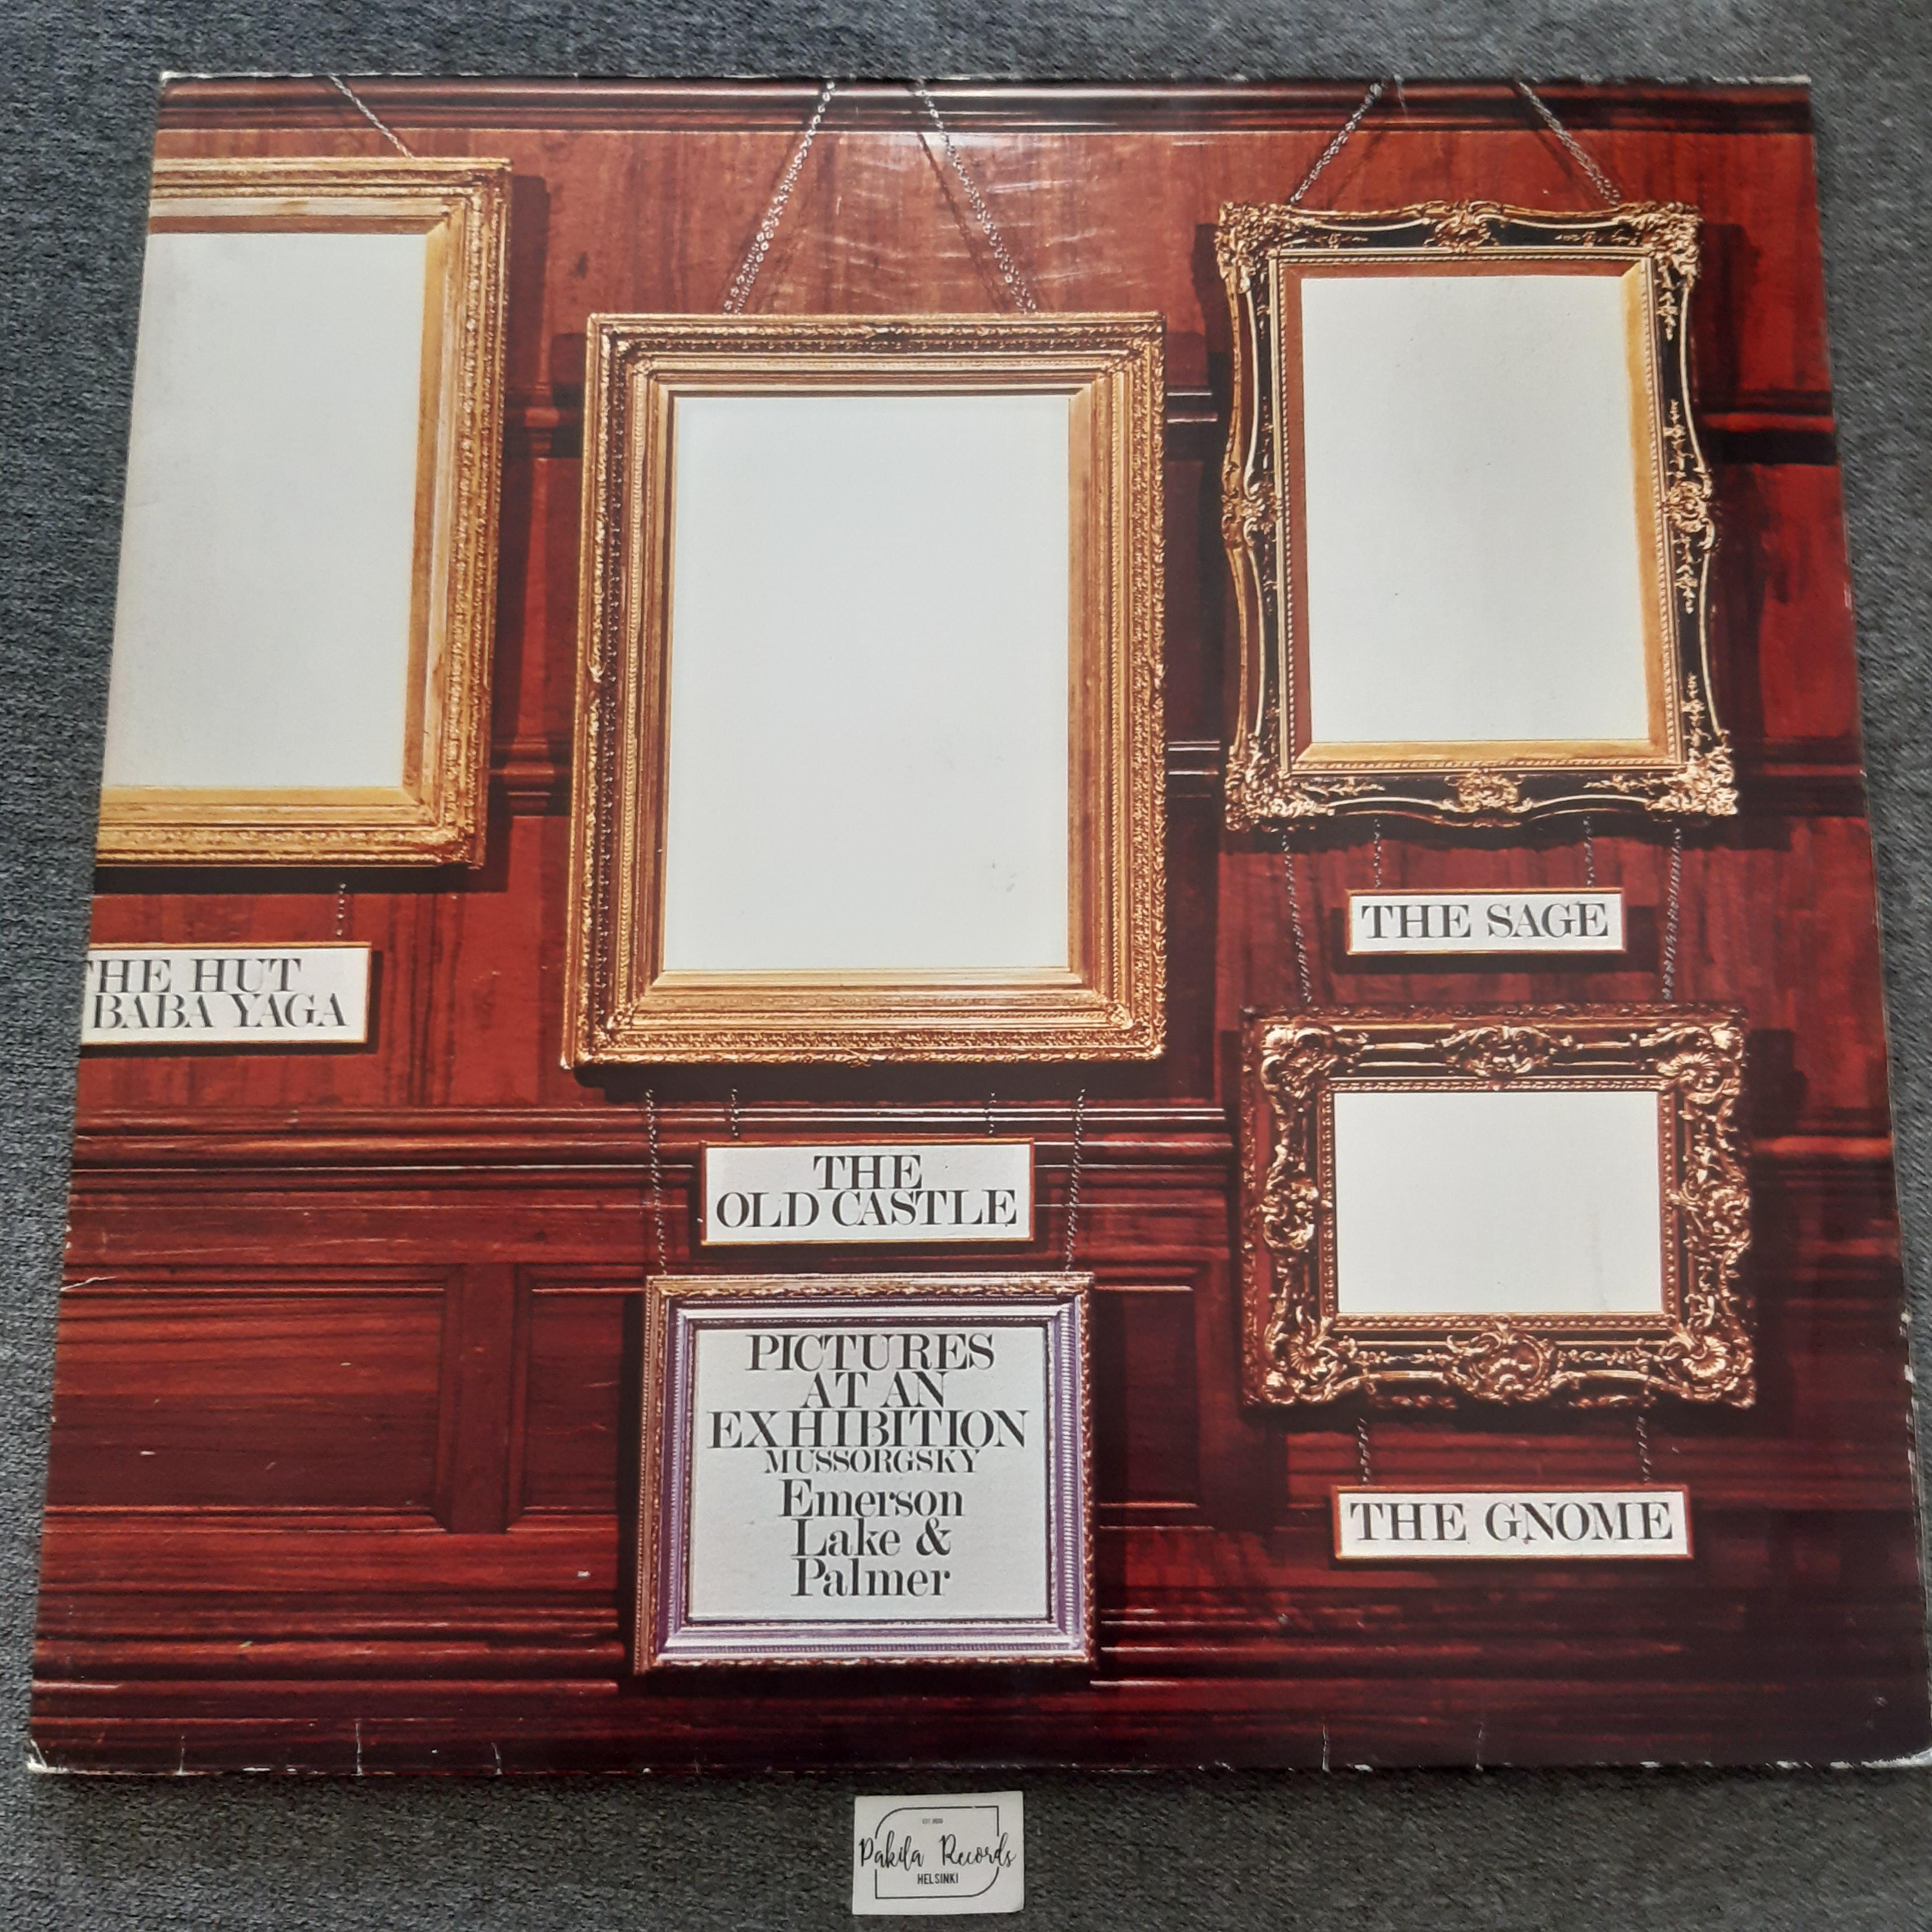 Emerson, Lake & Palmer - Pictures At An Exhibition - LP (käytetty)